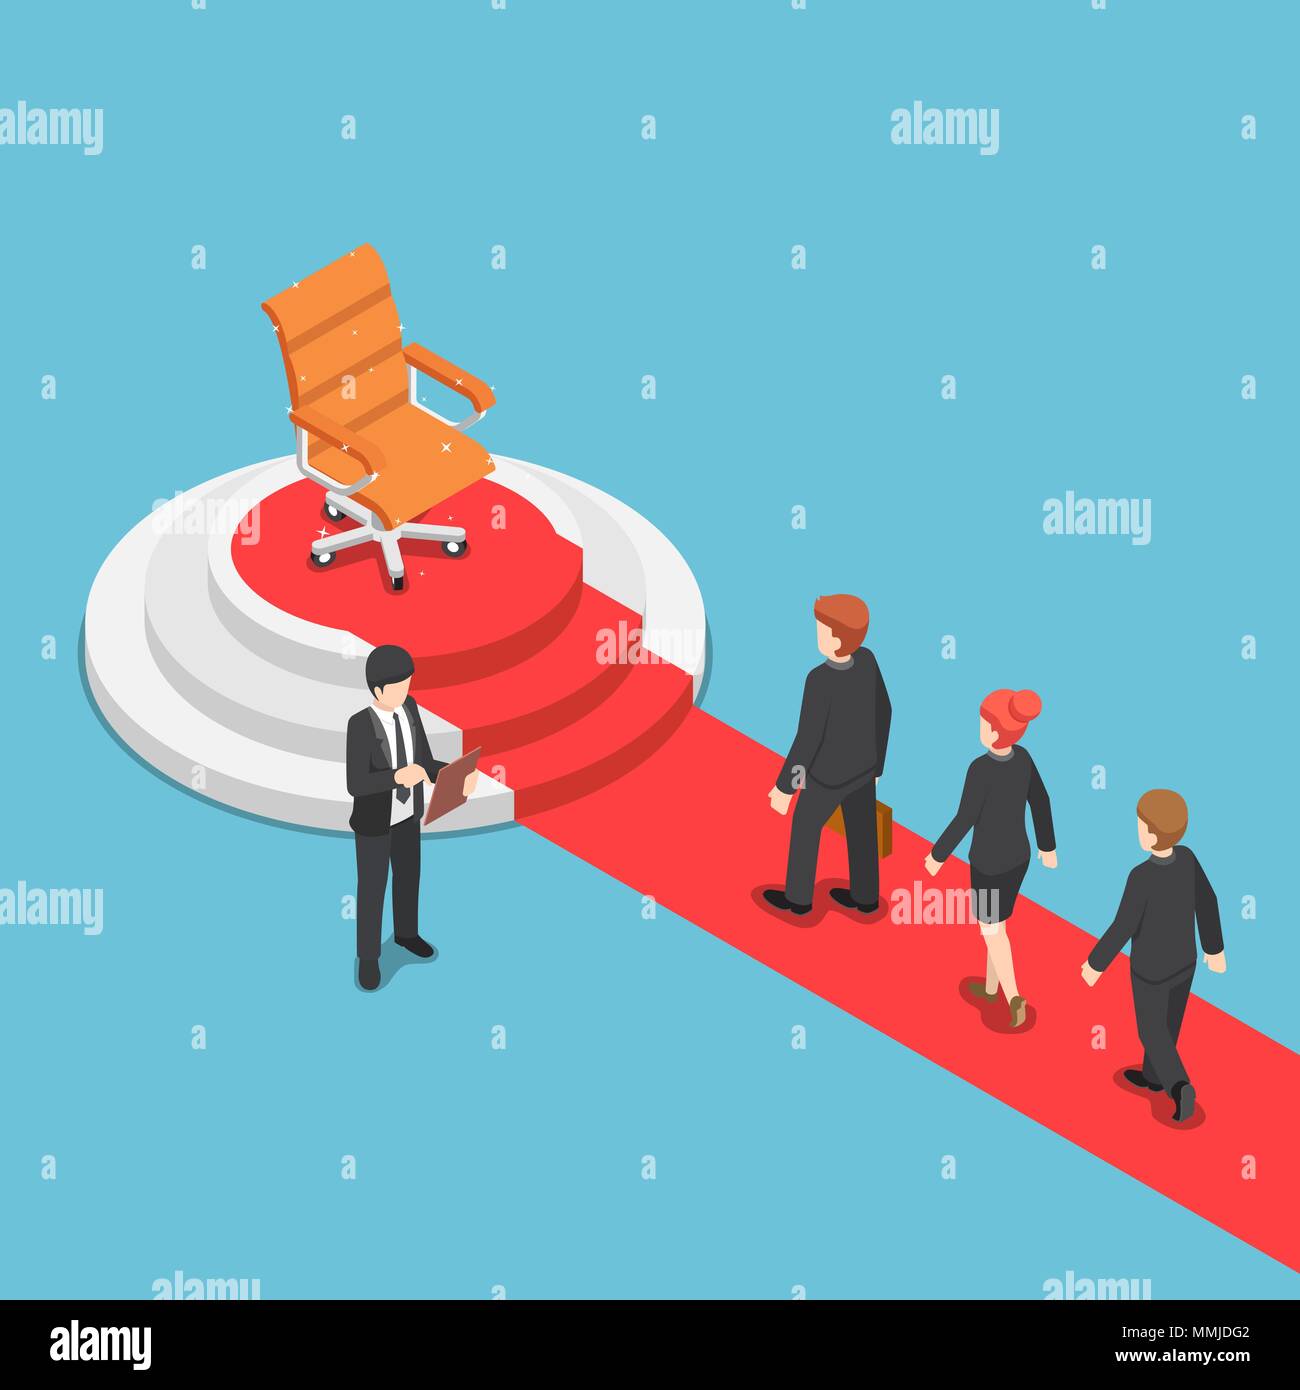 Flat 3d isometric businessman in a queue for job recruitment with empty chair on pedestal and red carpet. Job interview and human resource concept. Stock Vector